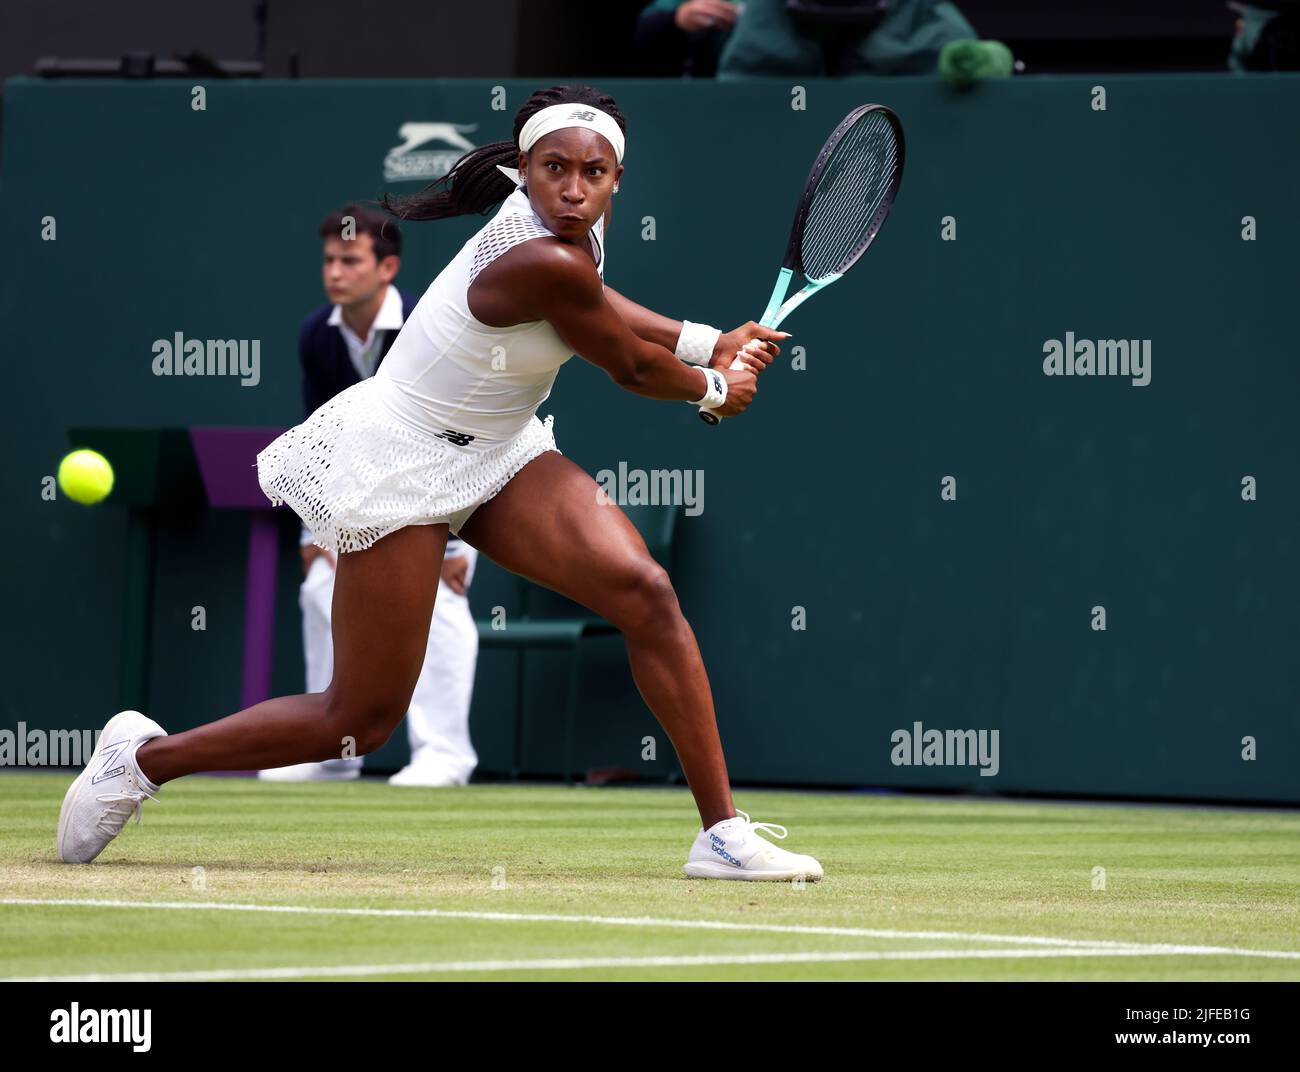 2 July, 2022 - London. Number 11 seed Coco Gauff during her three set loss to fellow American Amanda Anisimova on Centre Court at Wimbledon today. Credit: Adam Stoltman/Alamy Live News Stock Photo